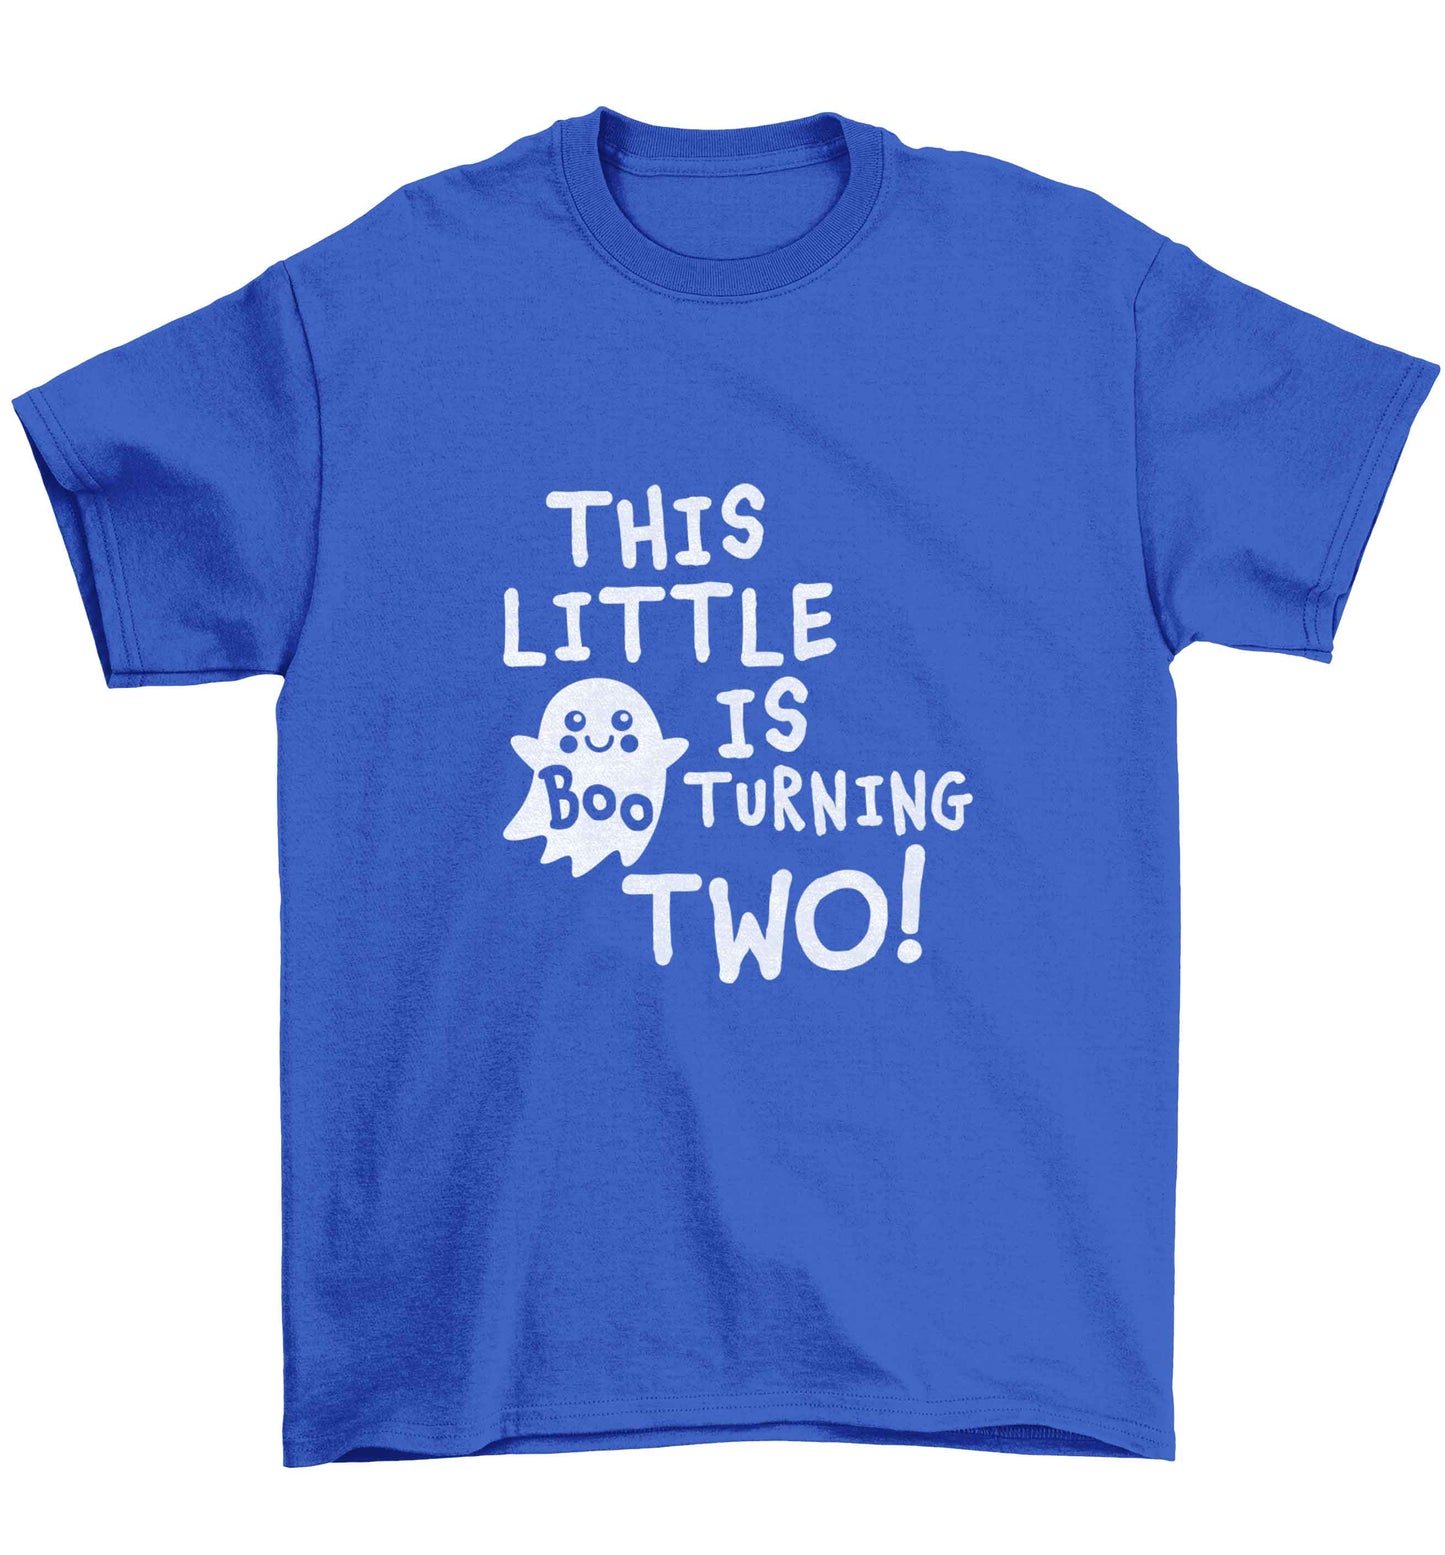 This little boo is turning two Children's blue Tshirt 12-13 Years